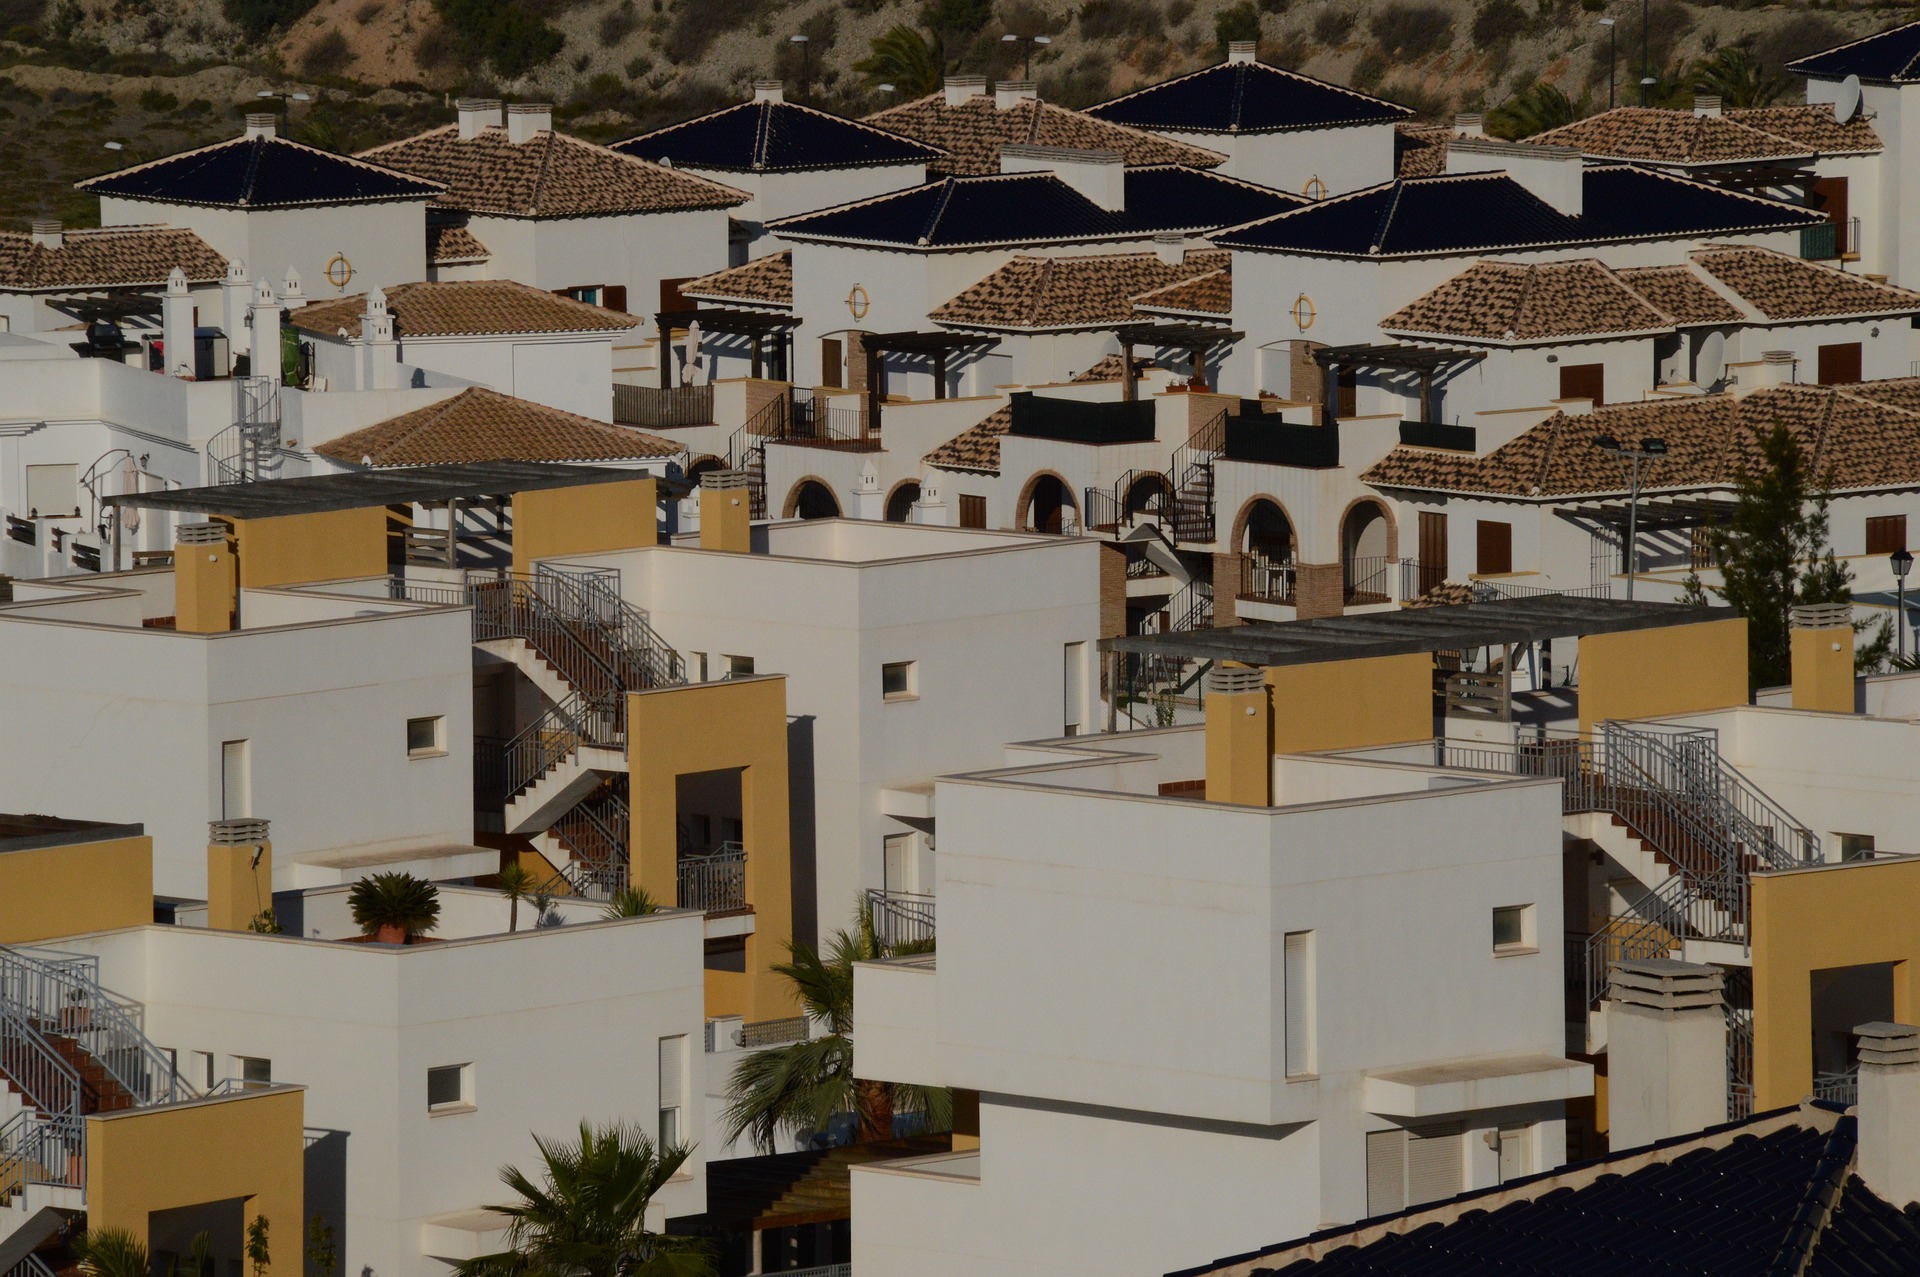 REVEALED The most popular areas of Spain’s Costa Blanca for overseas property buyers